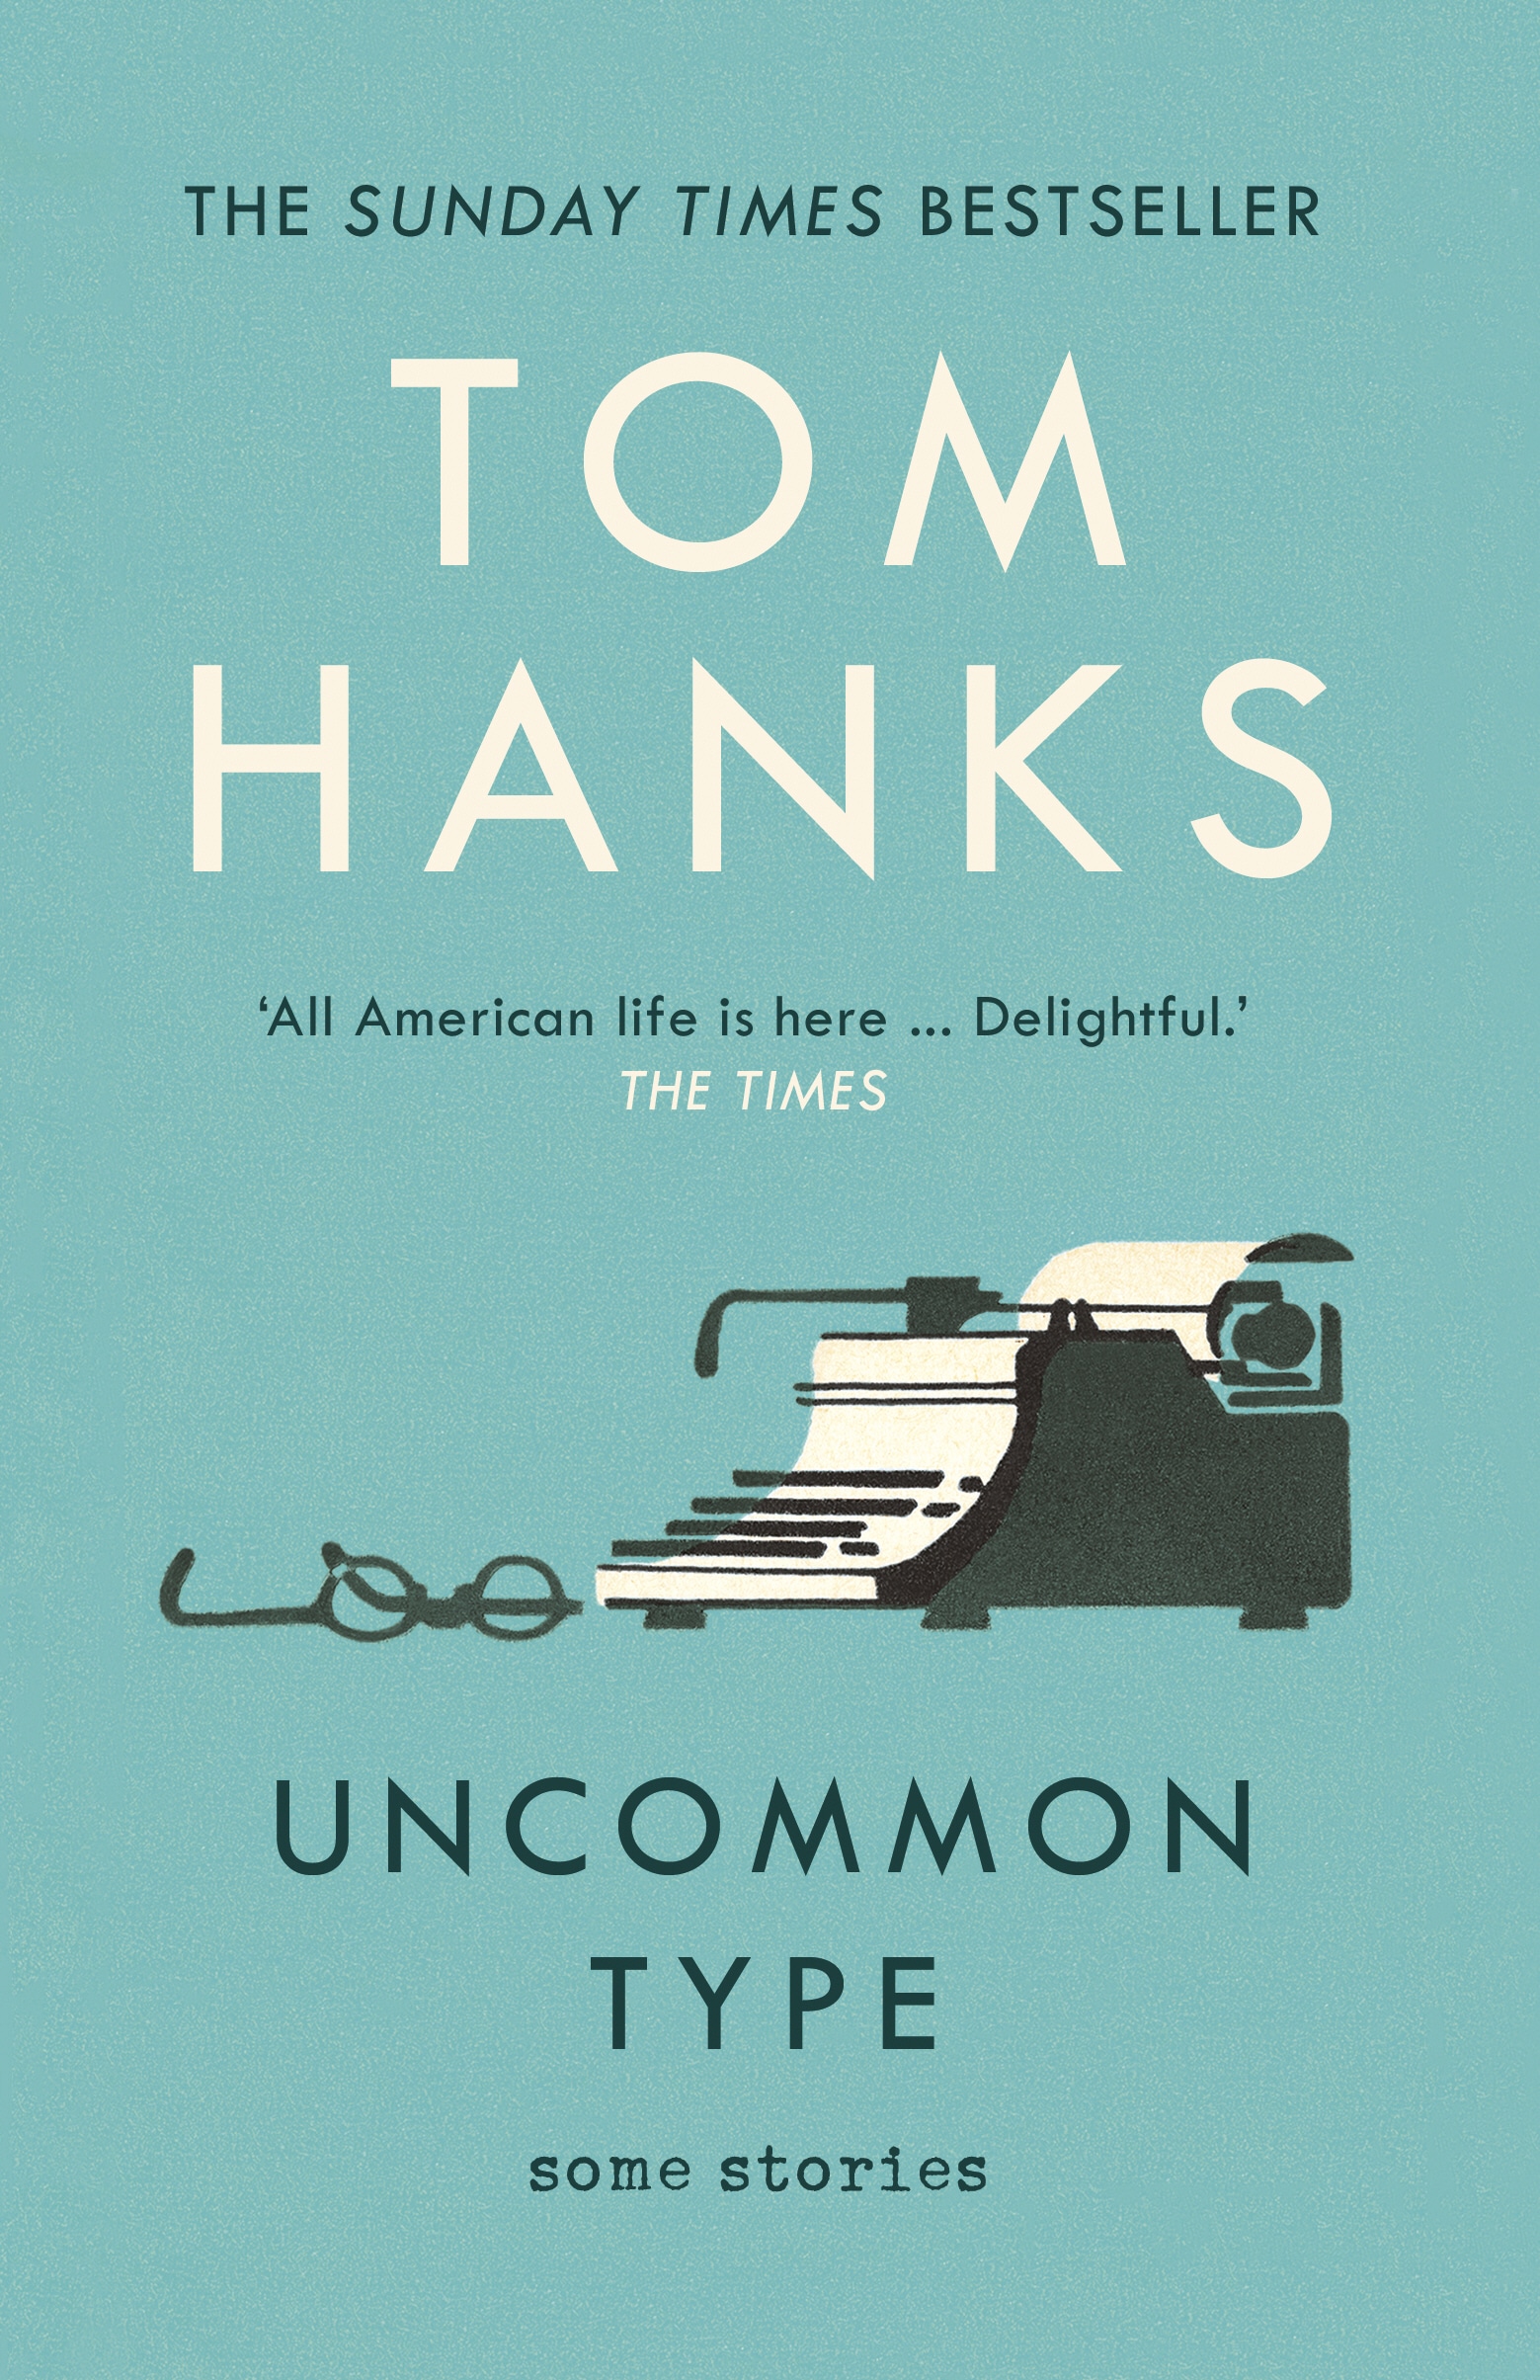 Book “Uncommon Type” by Tom Hanks — October 4, 2018